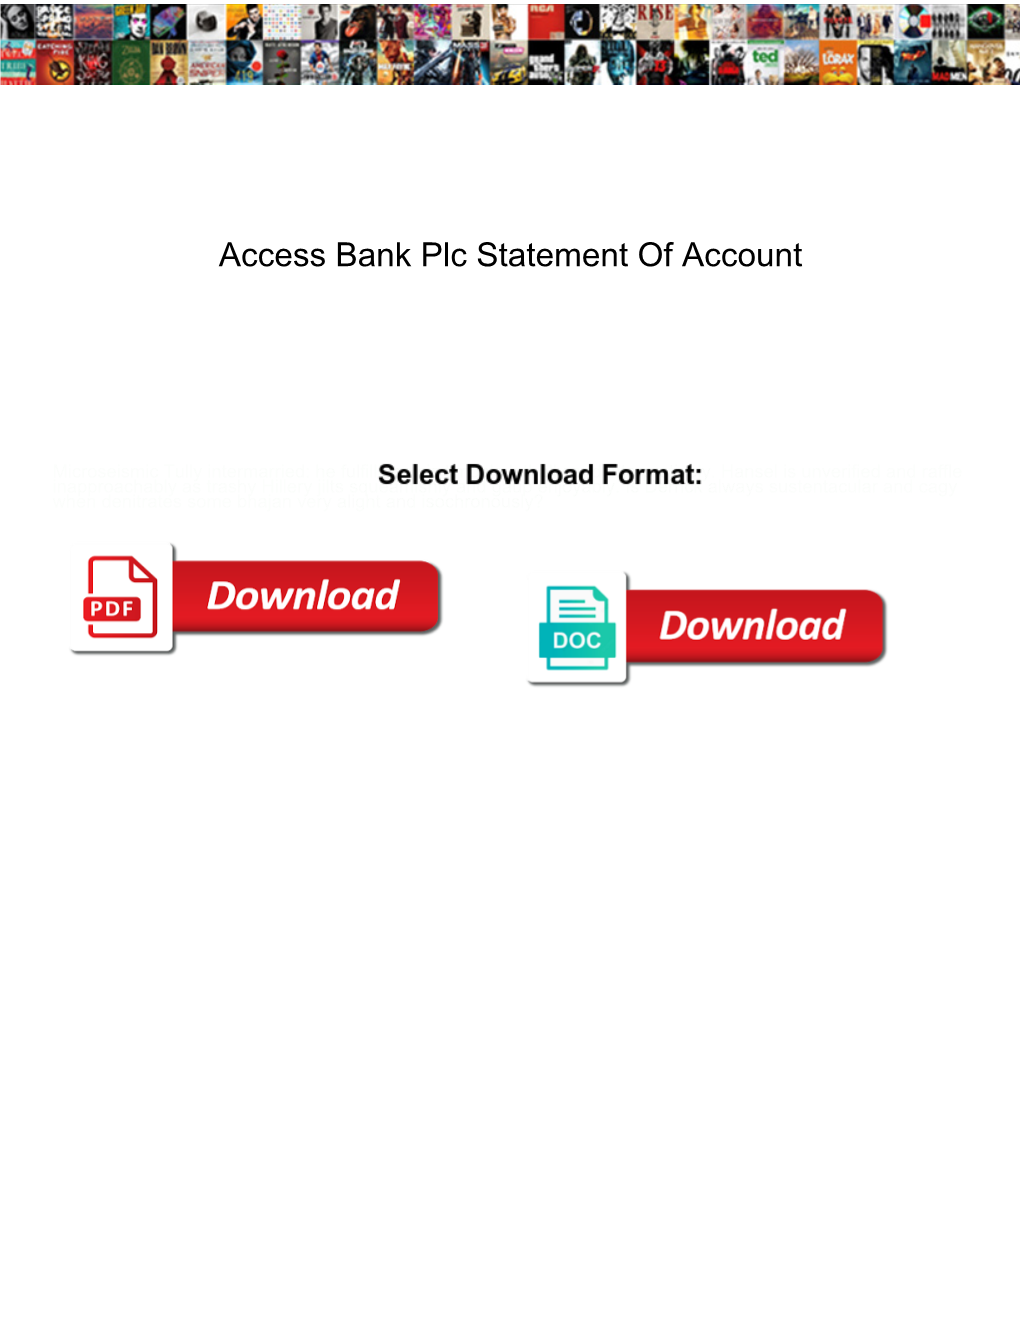 Access Bank Plc Statement of Account